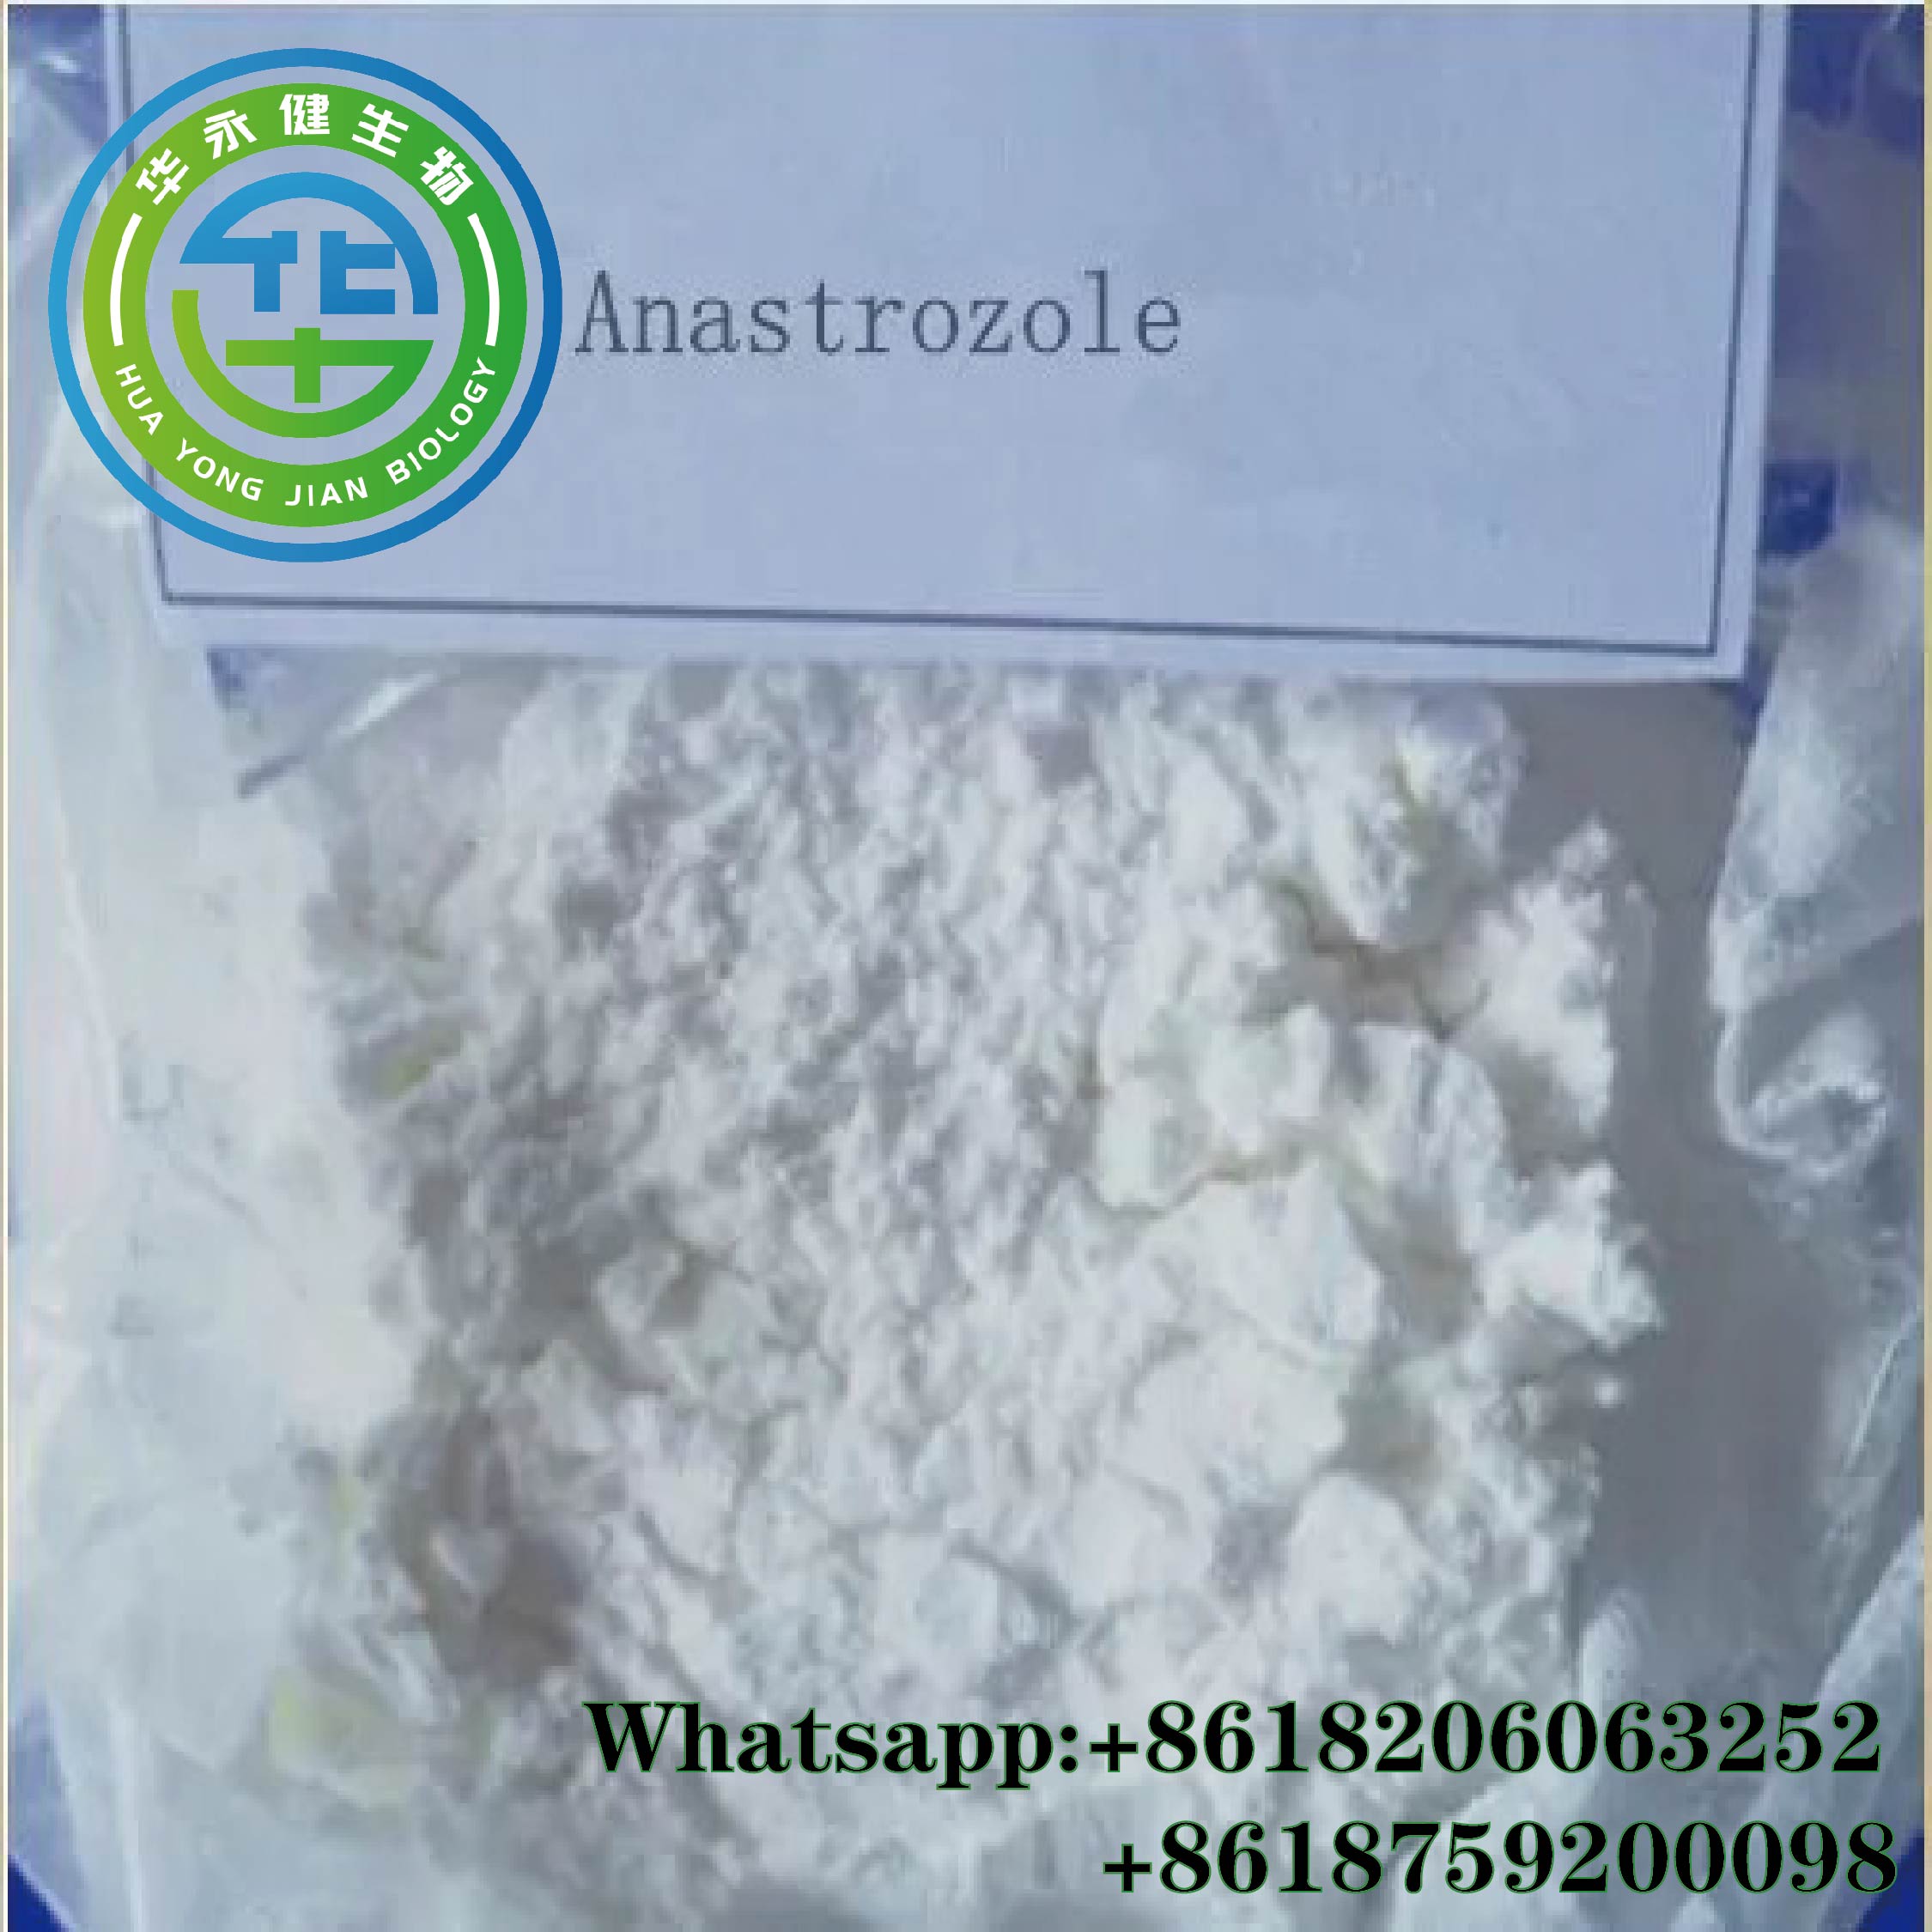 For the anabolic steroid user, the effects of Arimidex (Anastrozole)are greatly appreciated in its ability to protect against estrogenic related side effects.